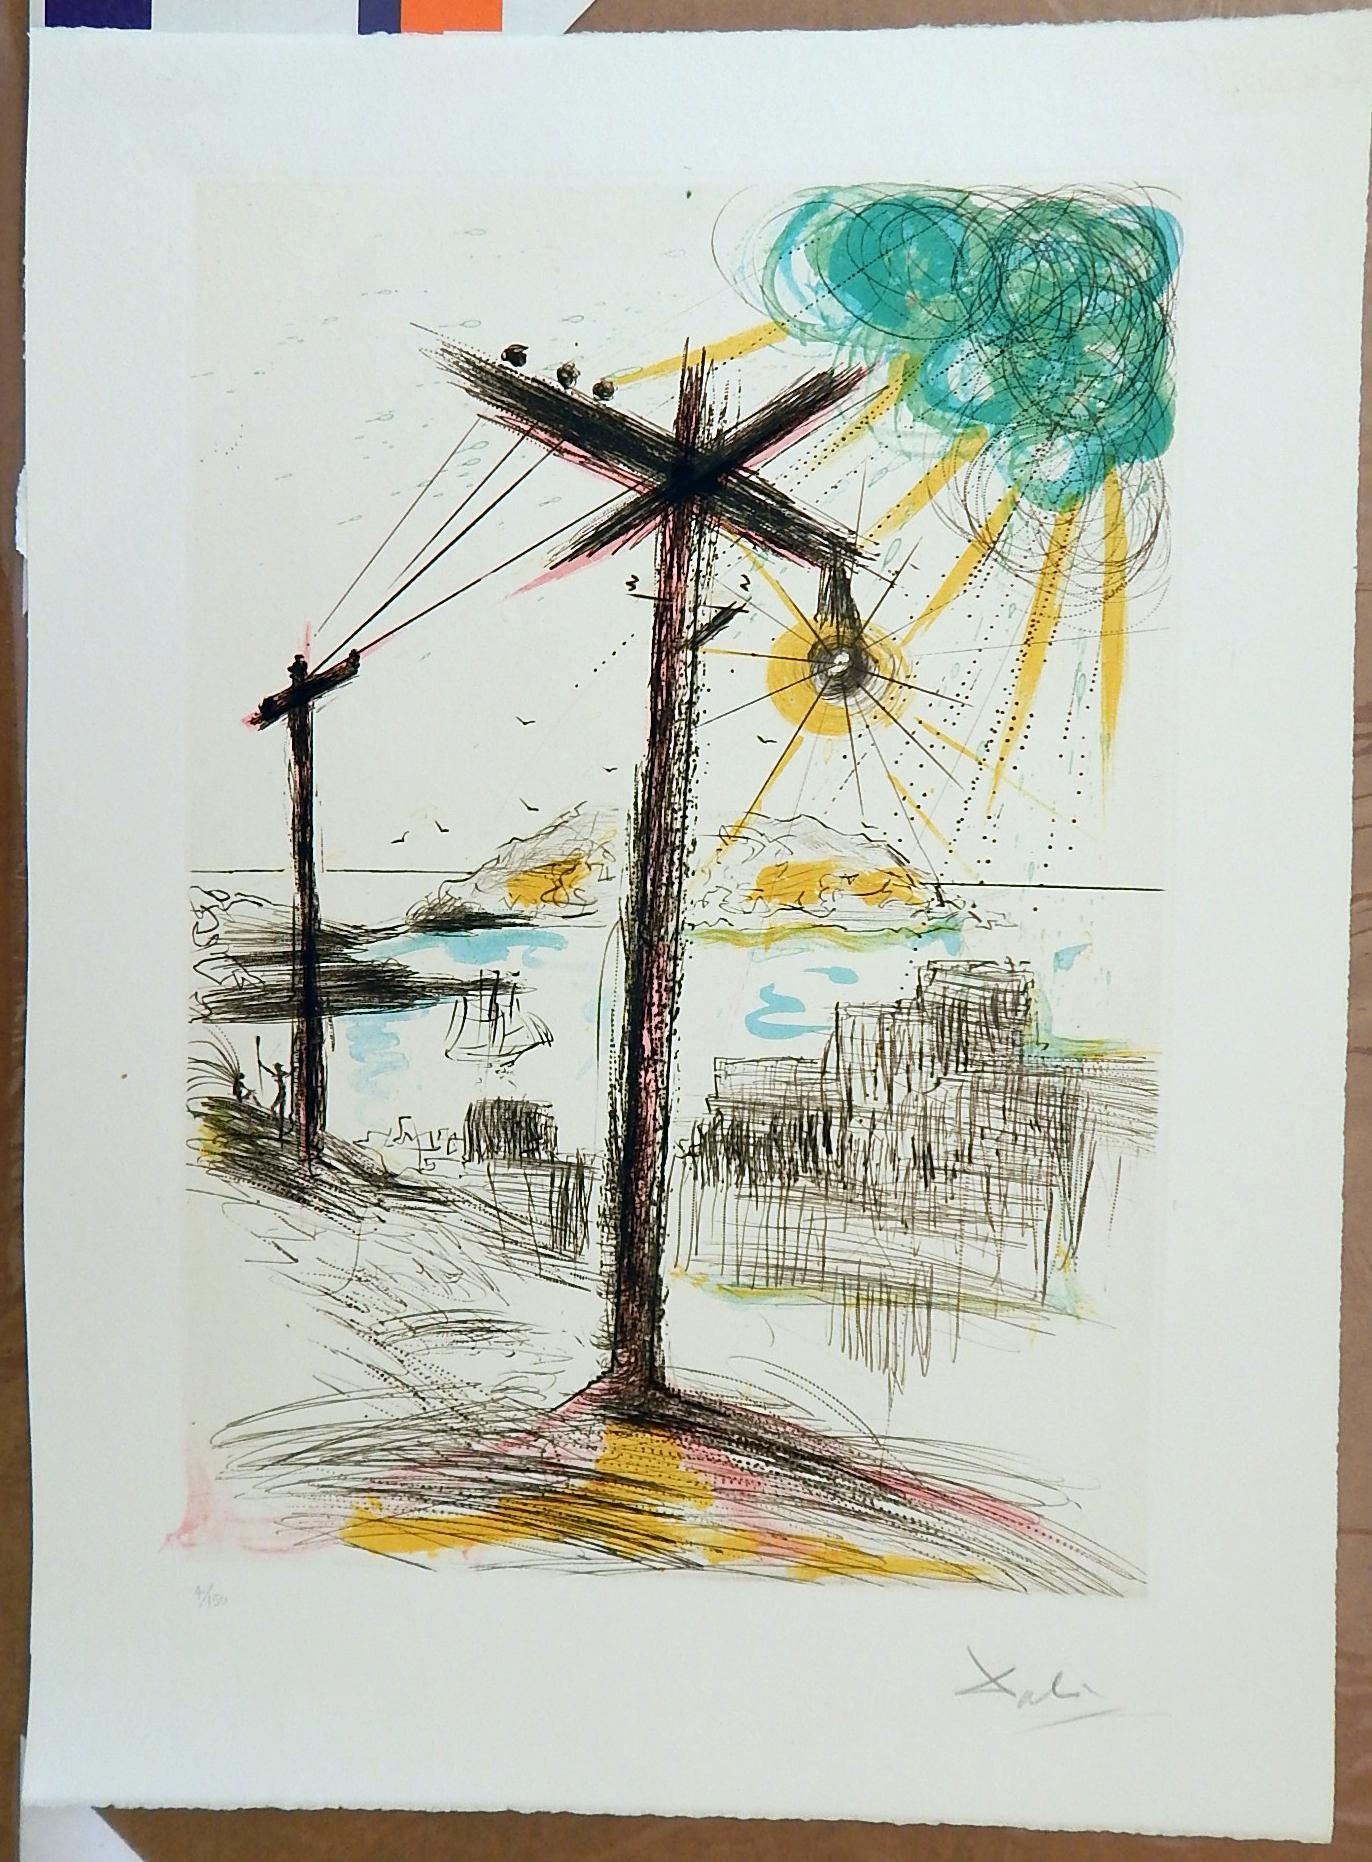 Original Lithograph in color by Salvador Dali (1904-1989)
From the Edition of 150.
Pencil signed Lower Right 